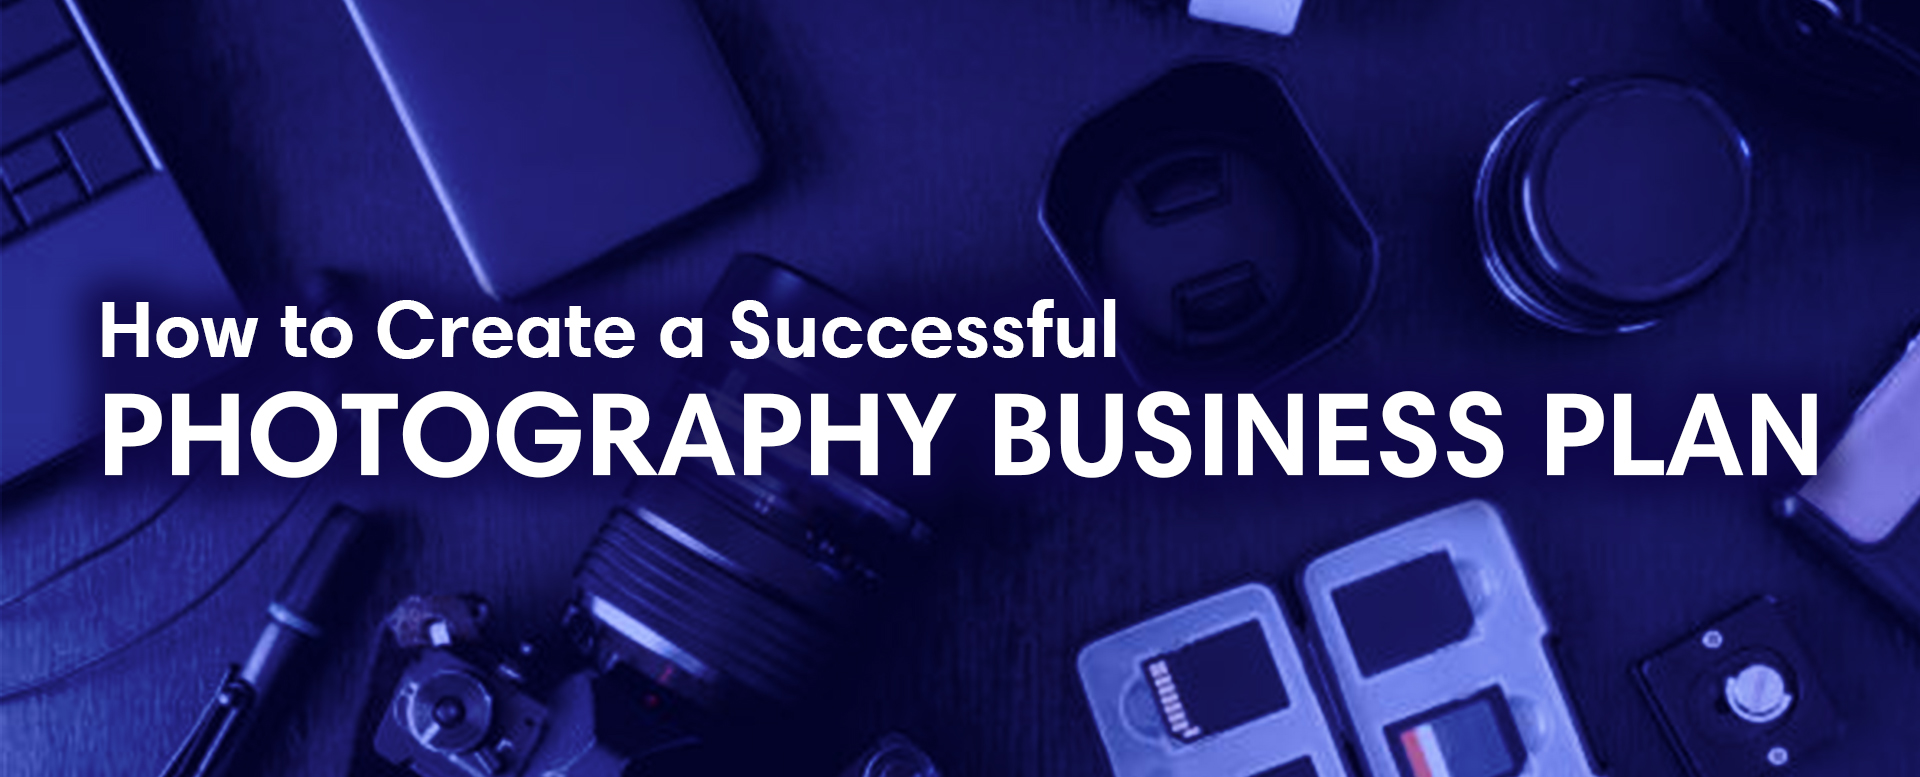 How to Create a Successful Photography Business Plan